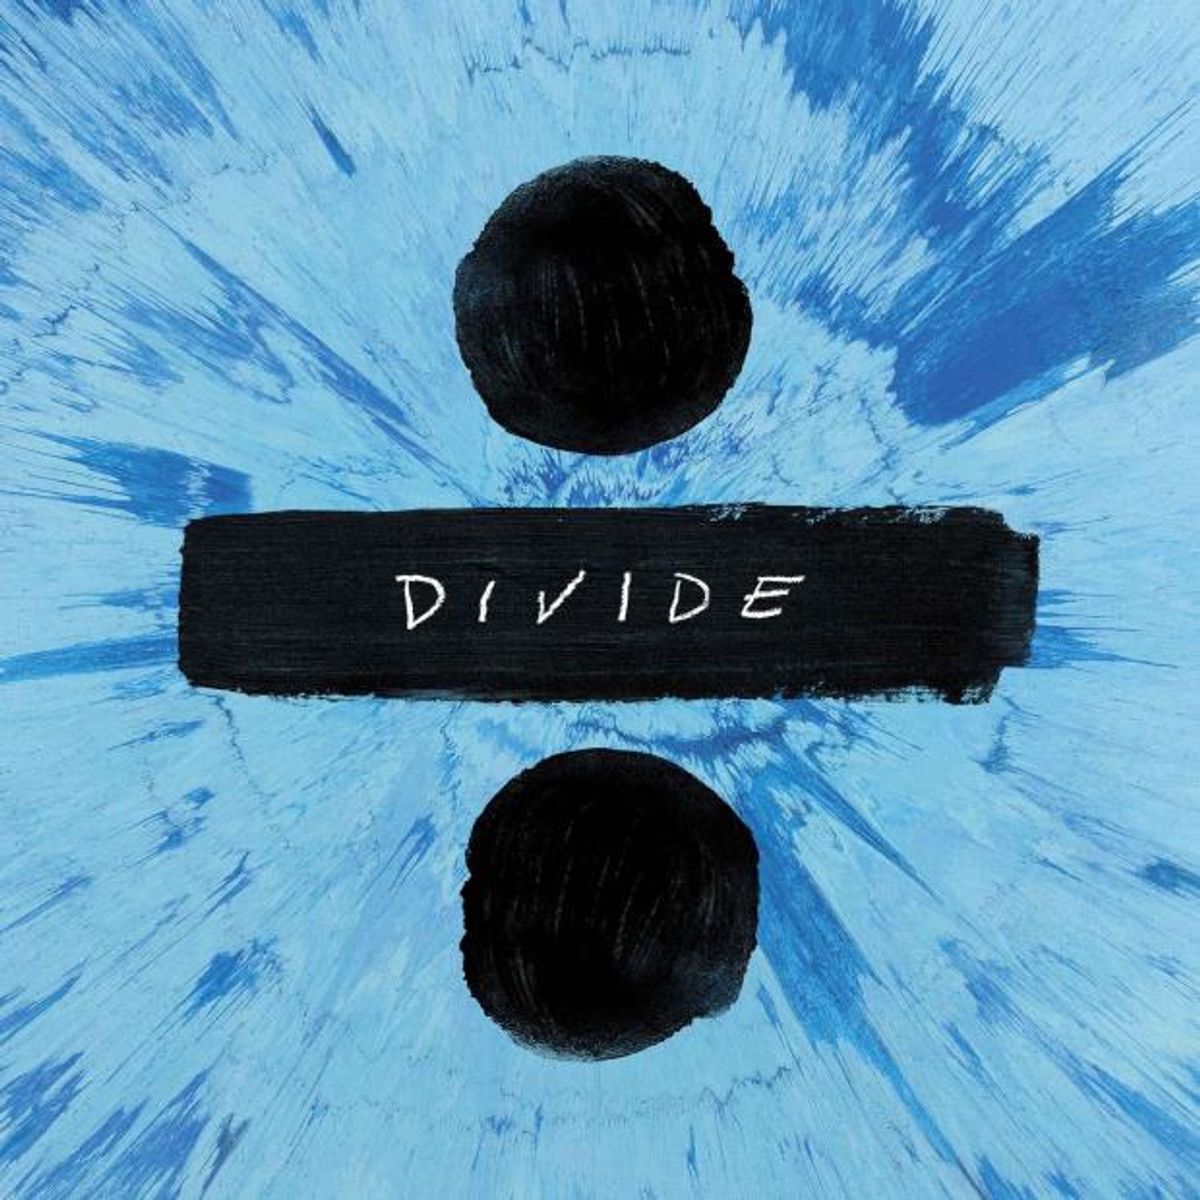 A Review of Divide